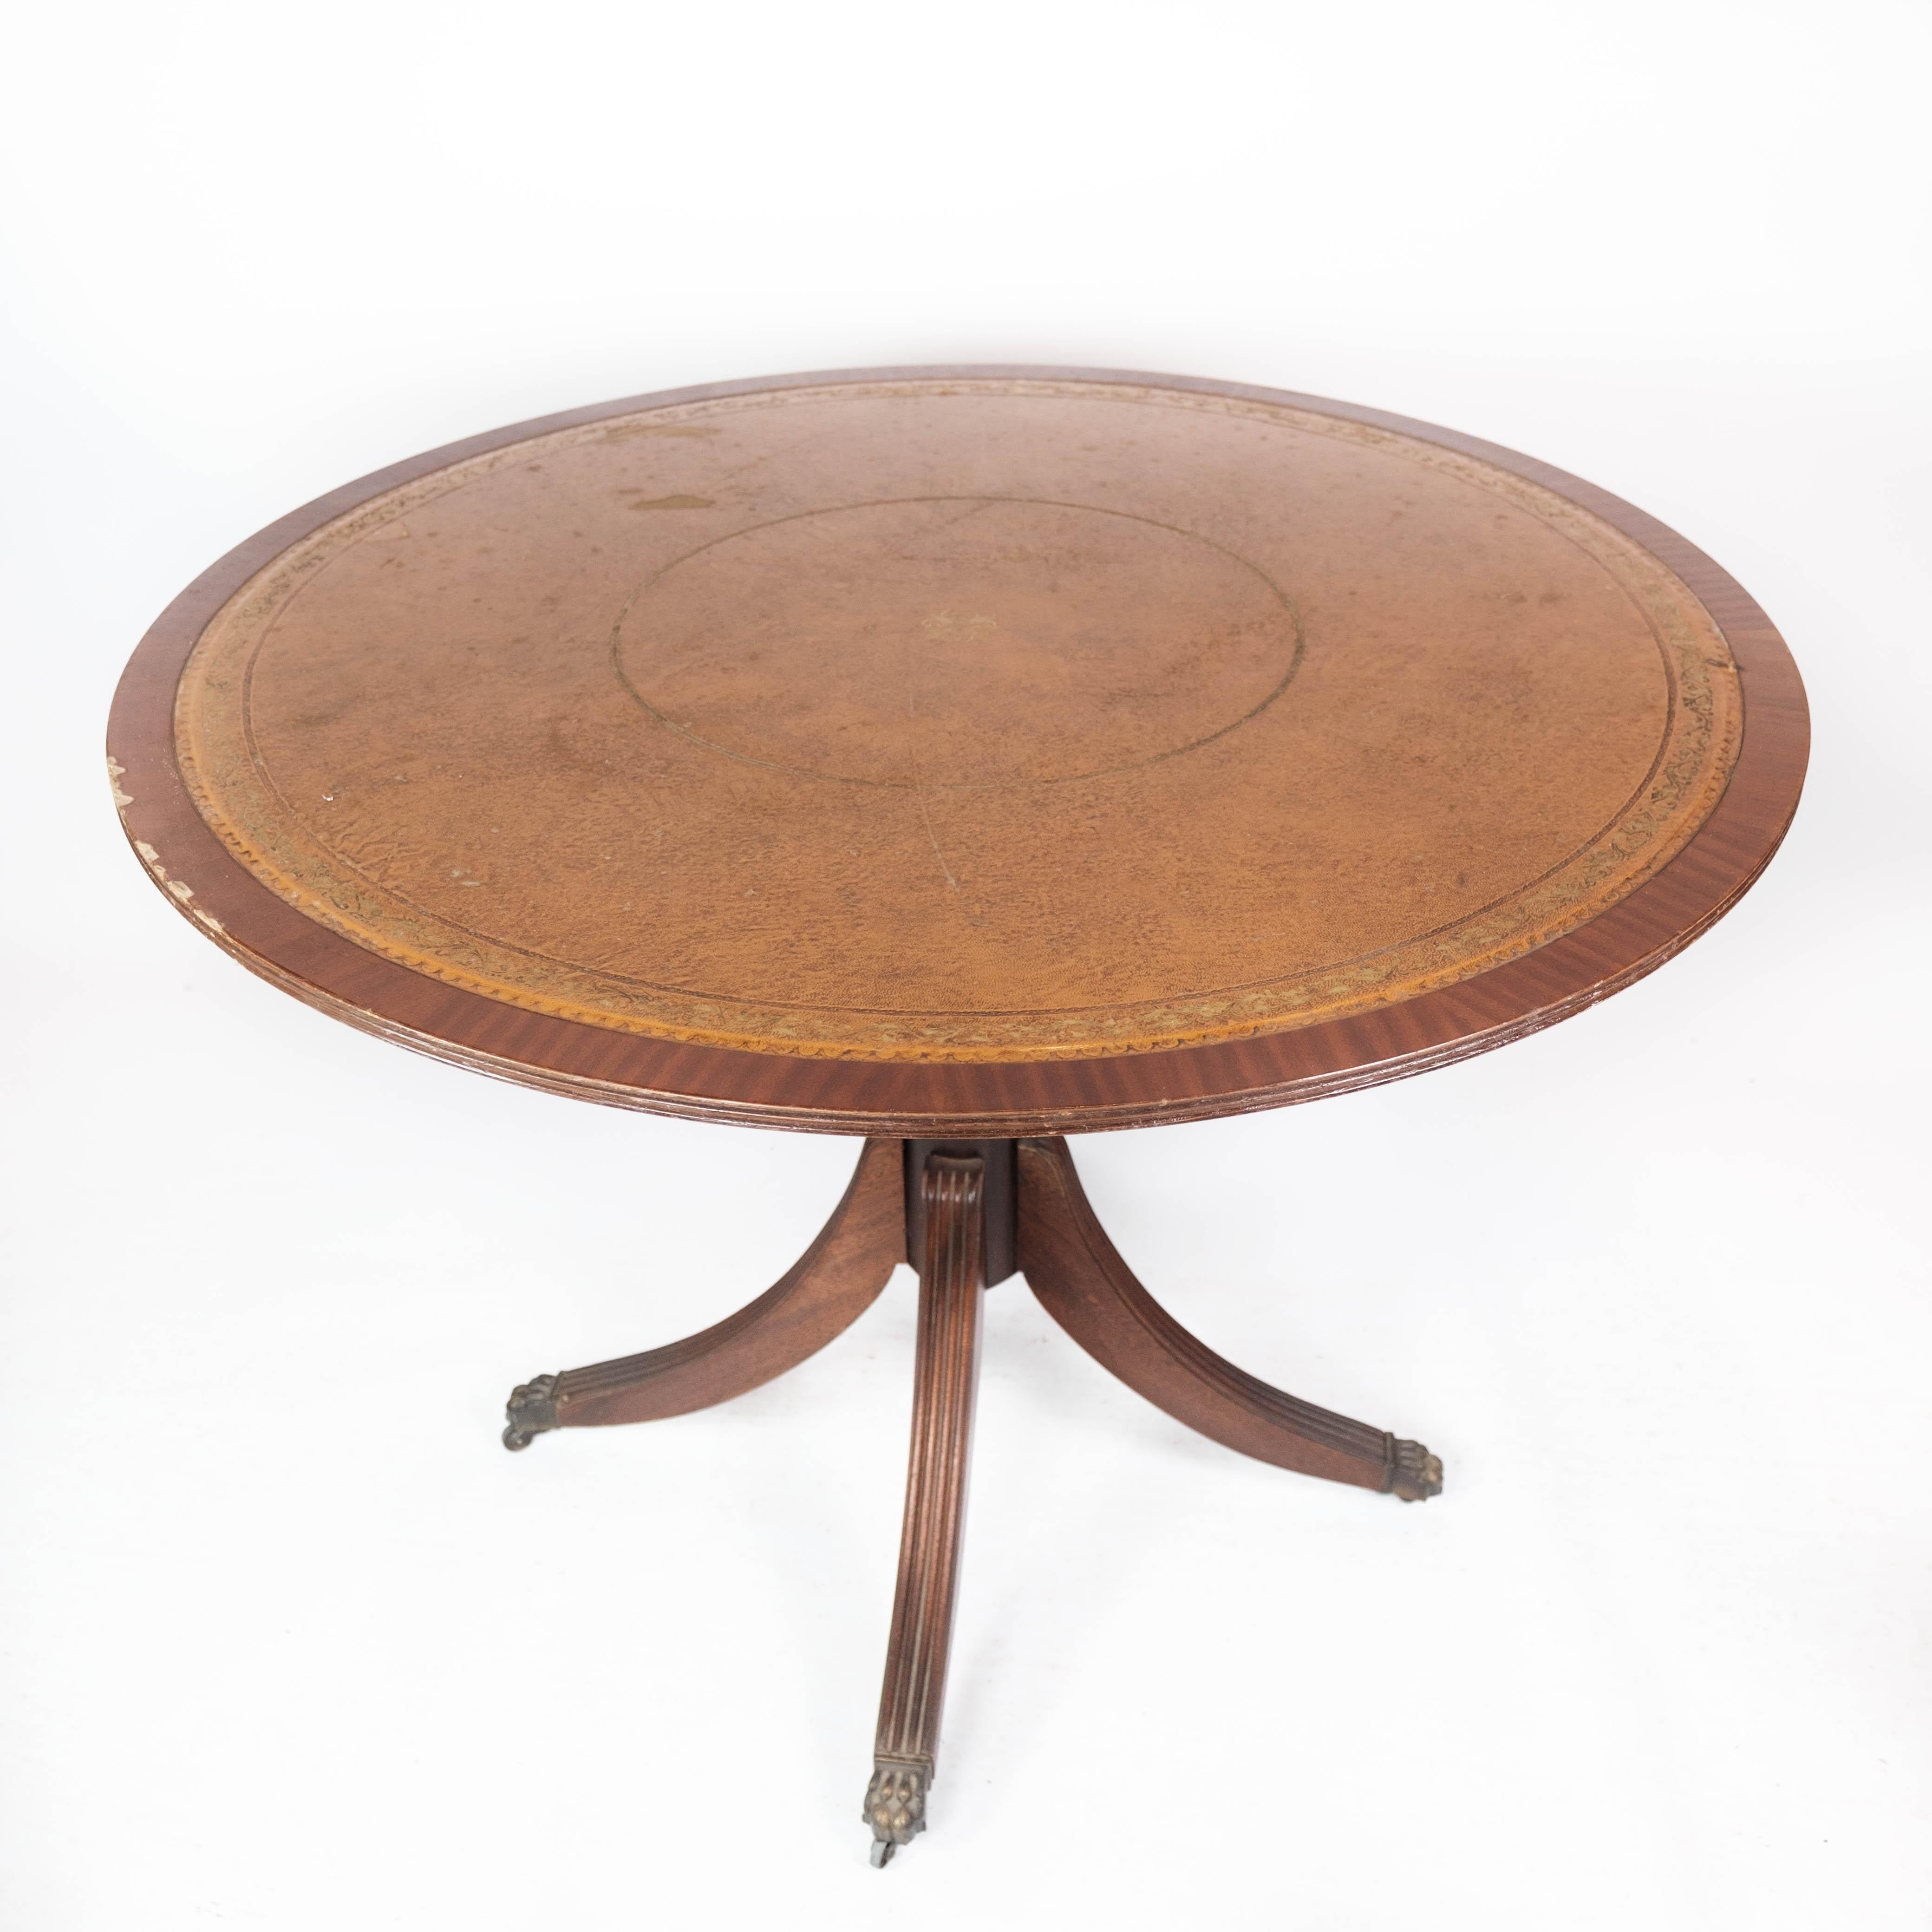 Antique dining table in mahogany with inlaid wood and leather, from the 1920s.